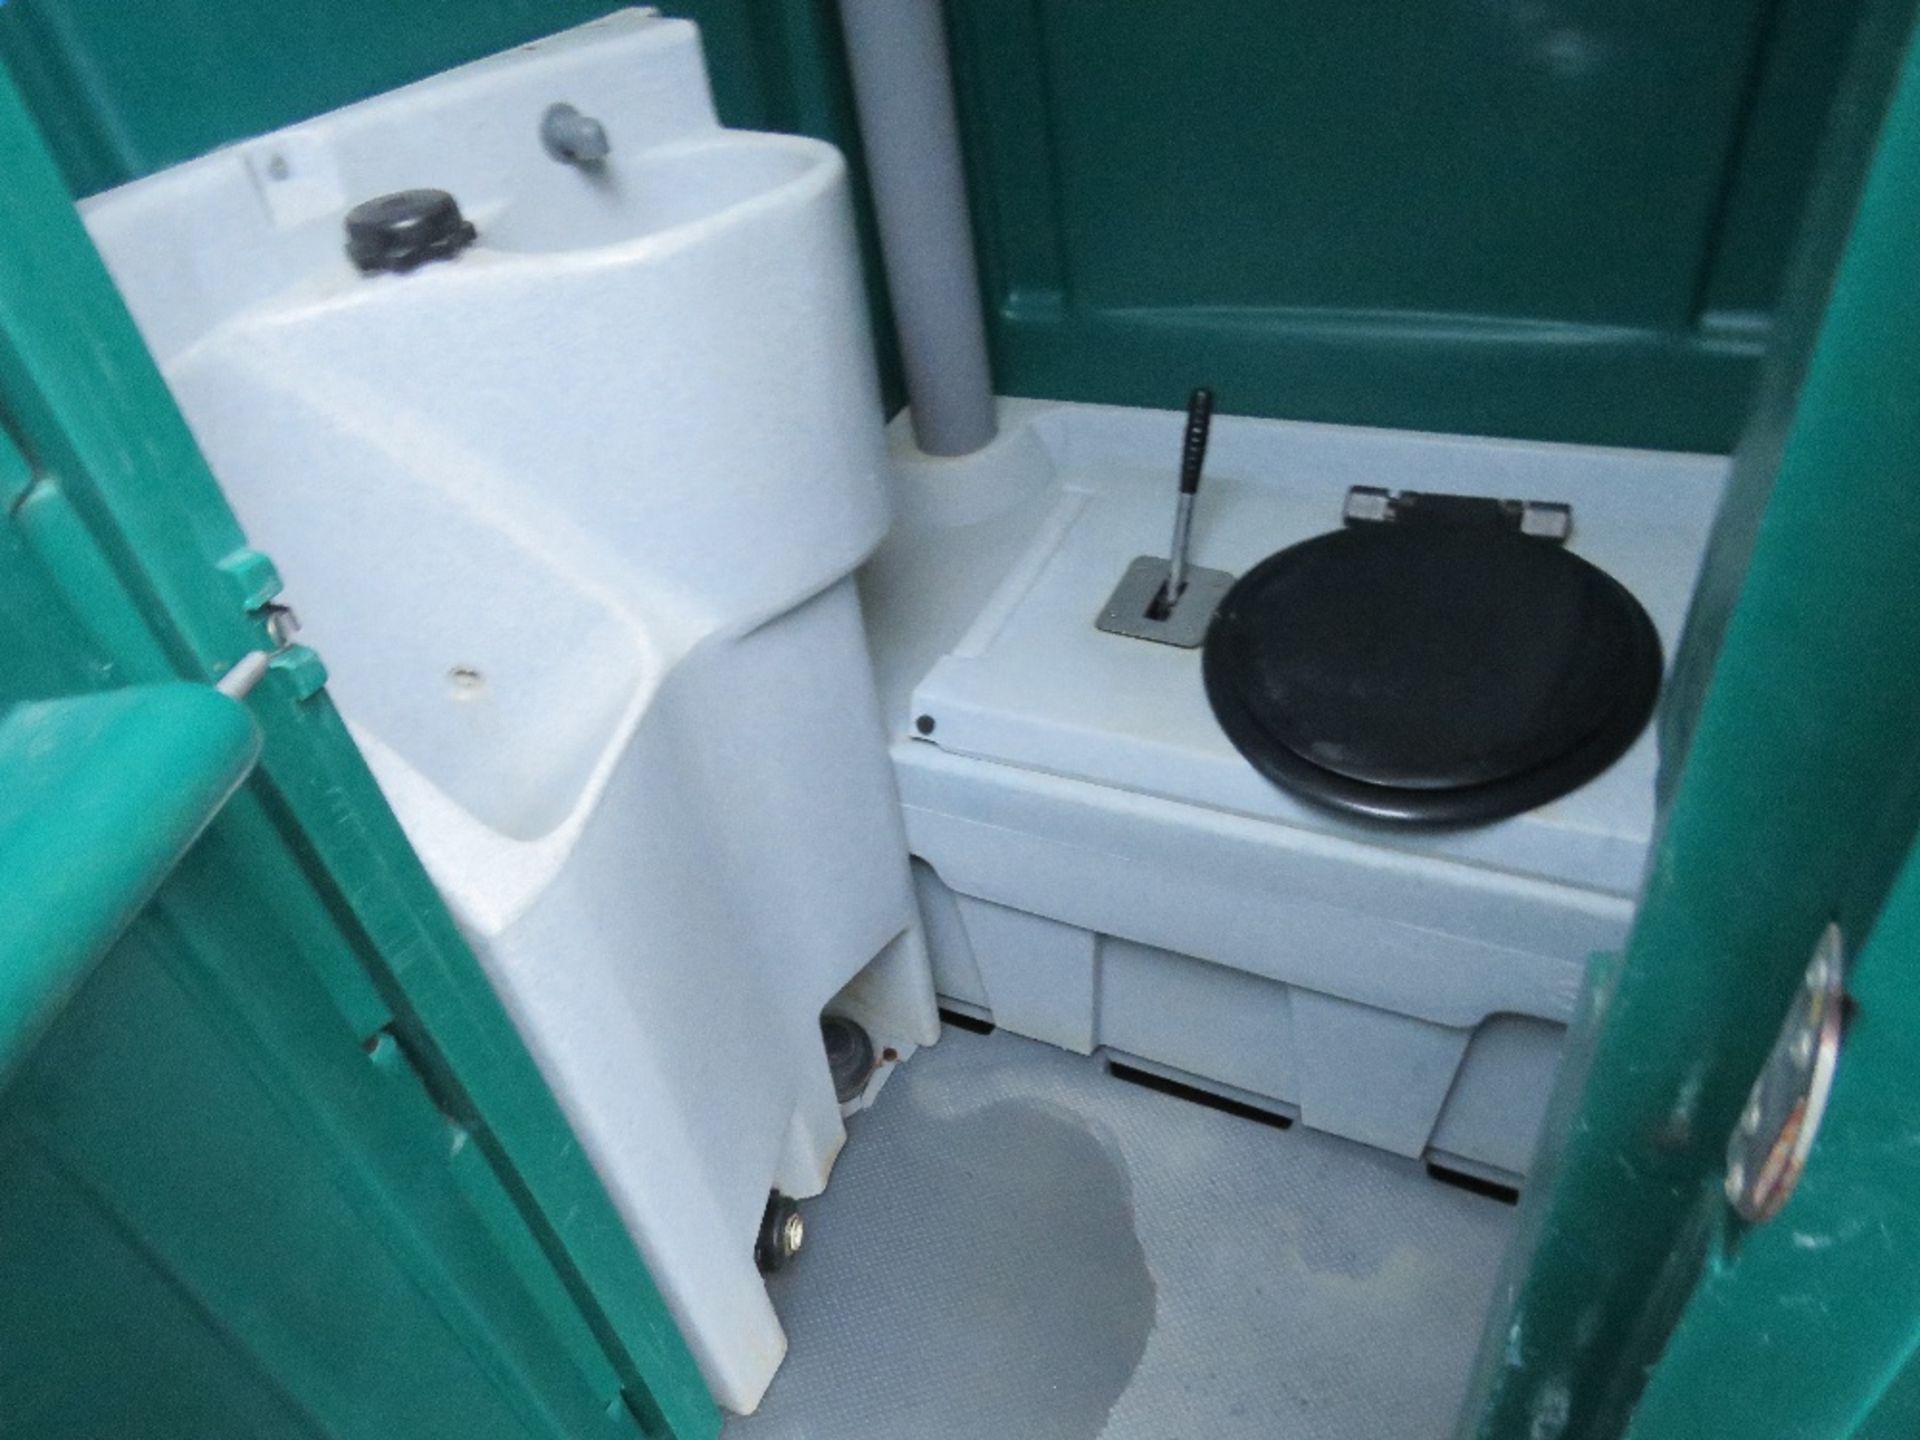 PORTABLE SITE / EVENTS TOILET, DIRECT FROM LOCAL COMPANY AS PART OF THEIR FLEET RENEWAL. - Image 3 of 5